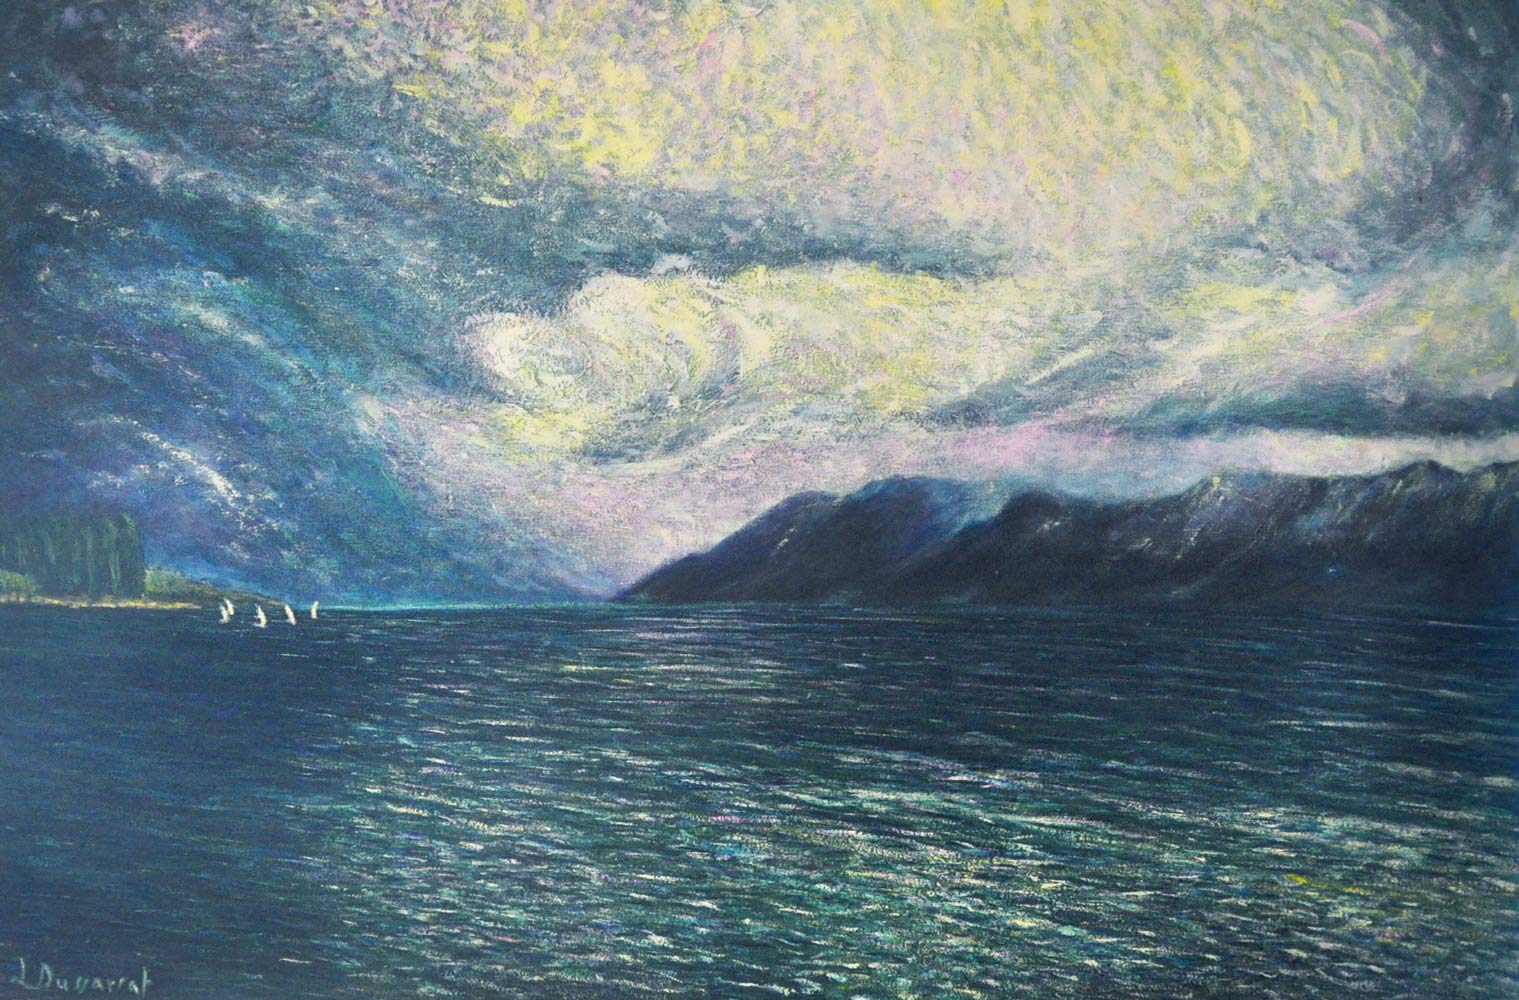 Before the storm, Lutry. Oil on canvas, 80x120, 2017